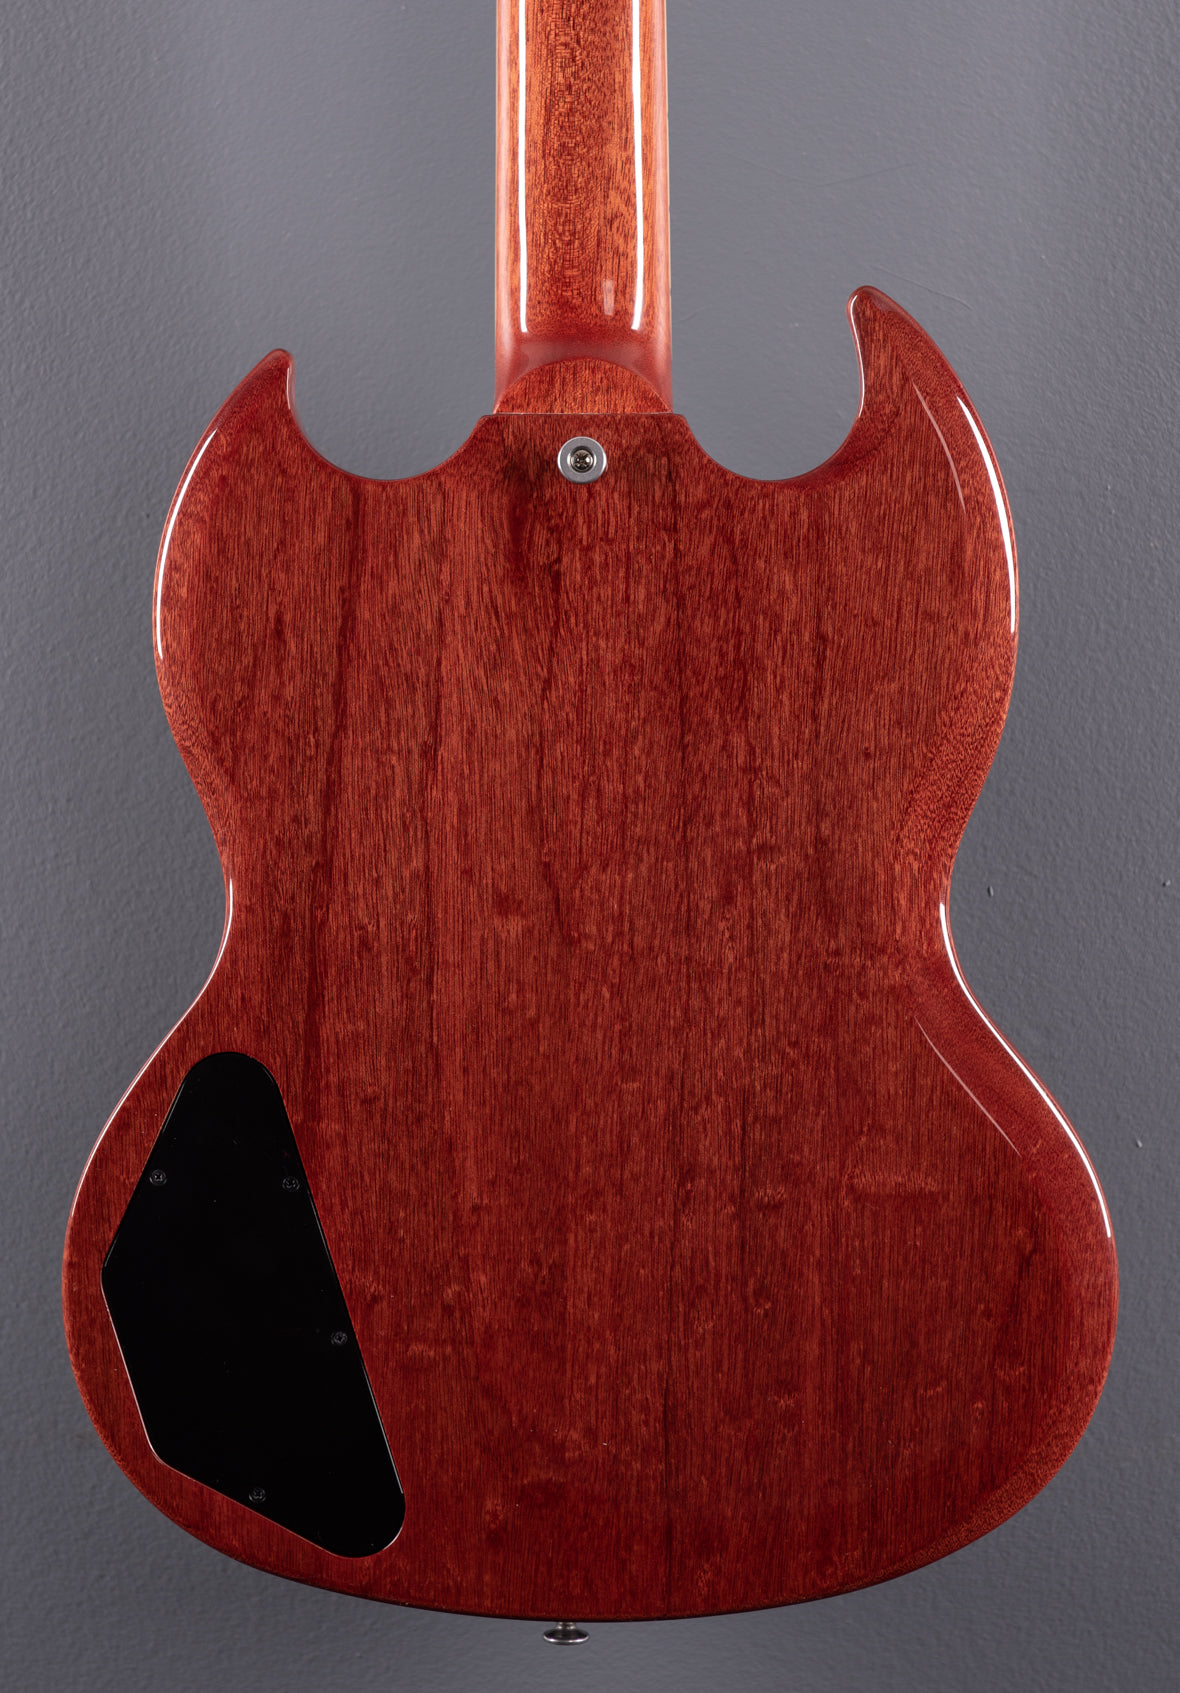 SG Special - Vintage Cherry